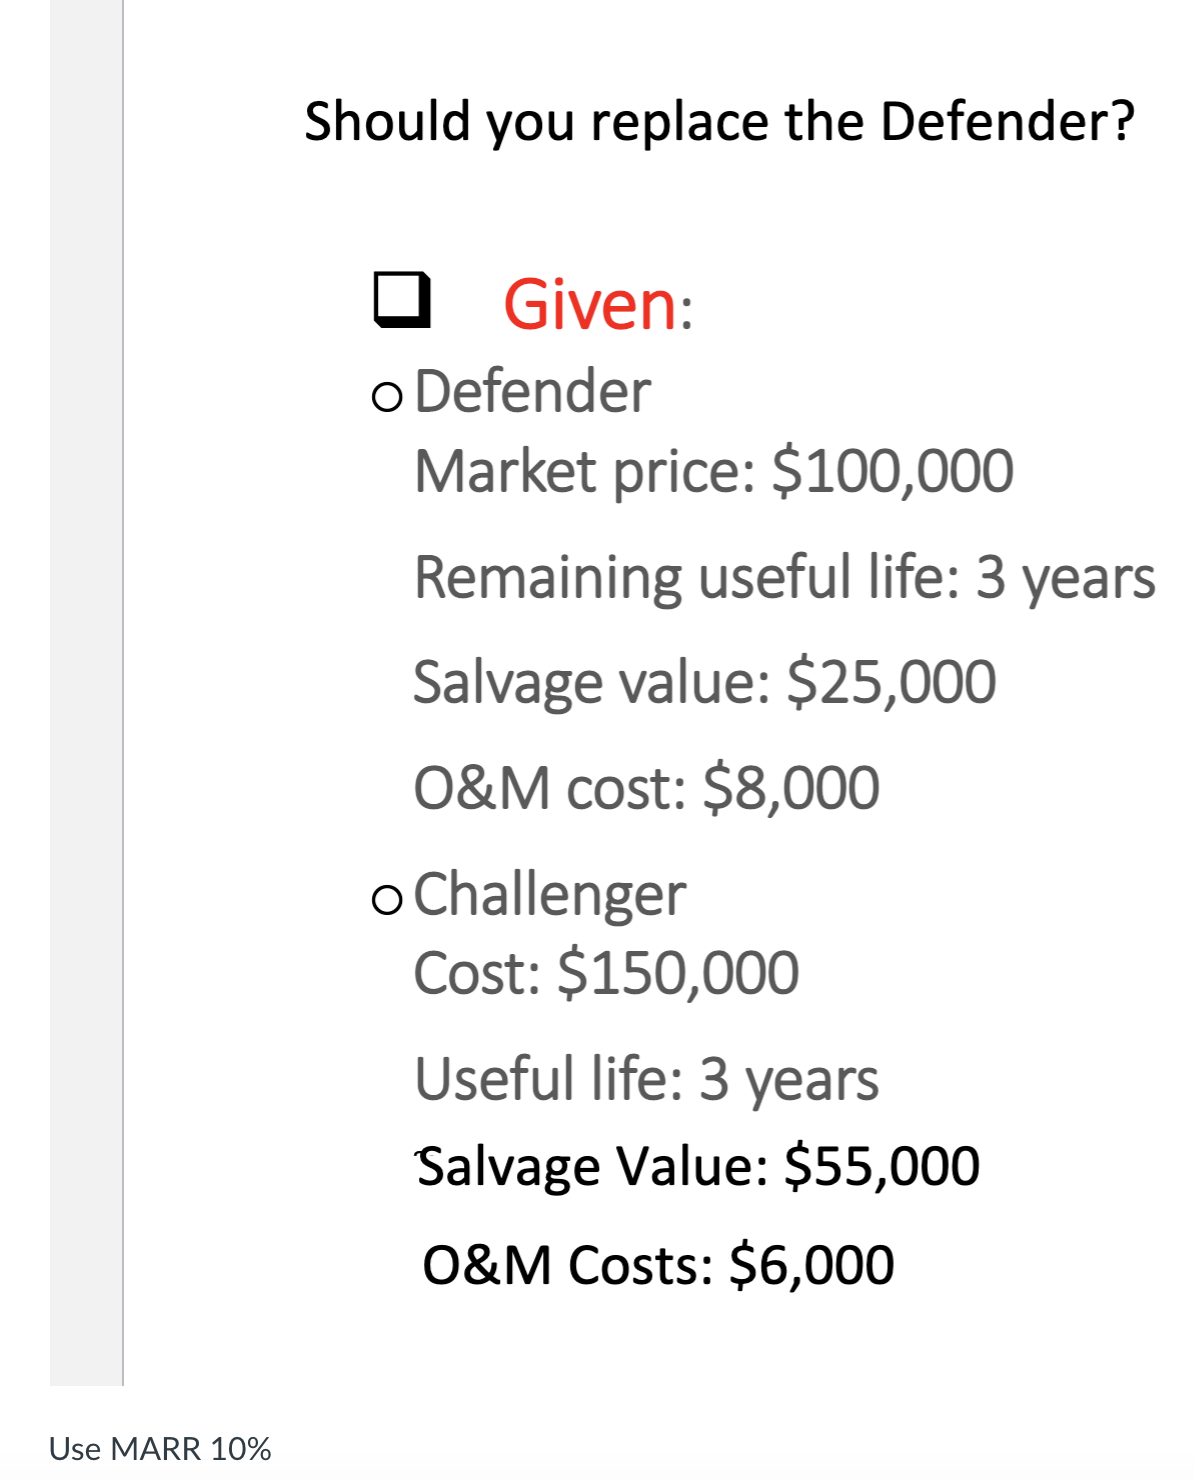 Should you replace the Defender?
Given:
o Defender
Market price: $100,000
Remaining useful life: 3 years
Salvage value: $25,000
O&M cost: $8,000
o Challenger
Cost: $150,000
Useful life: 3 years
Salvage Value: $55,000
O&M Costs: $6,000
Use MARR 10%
